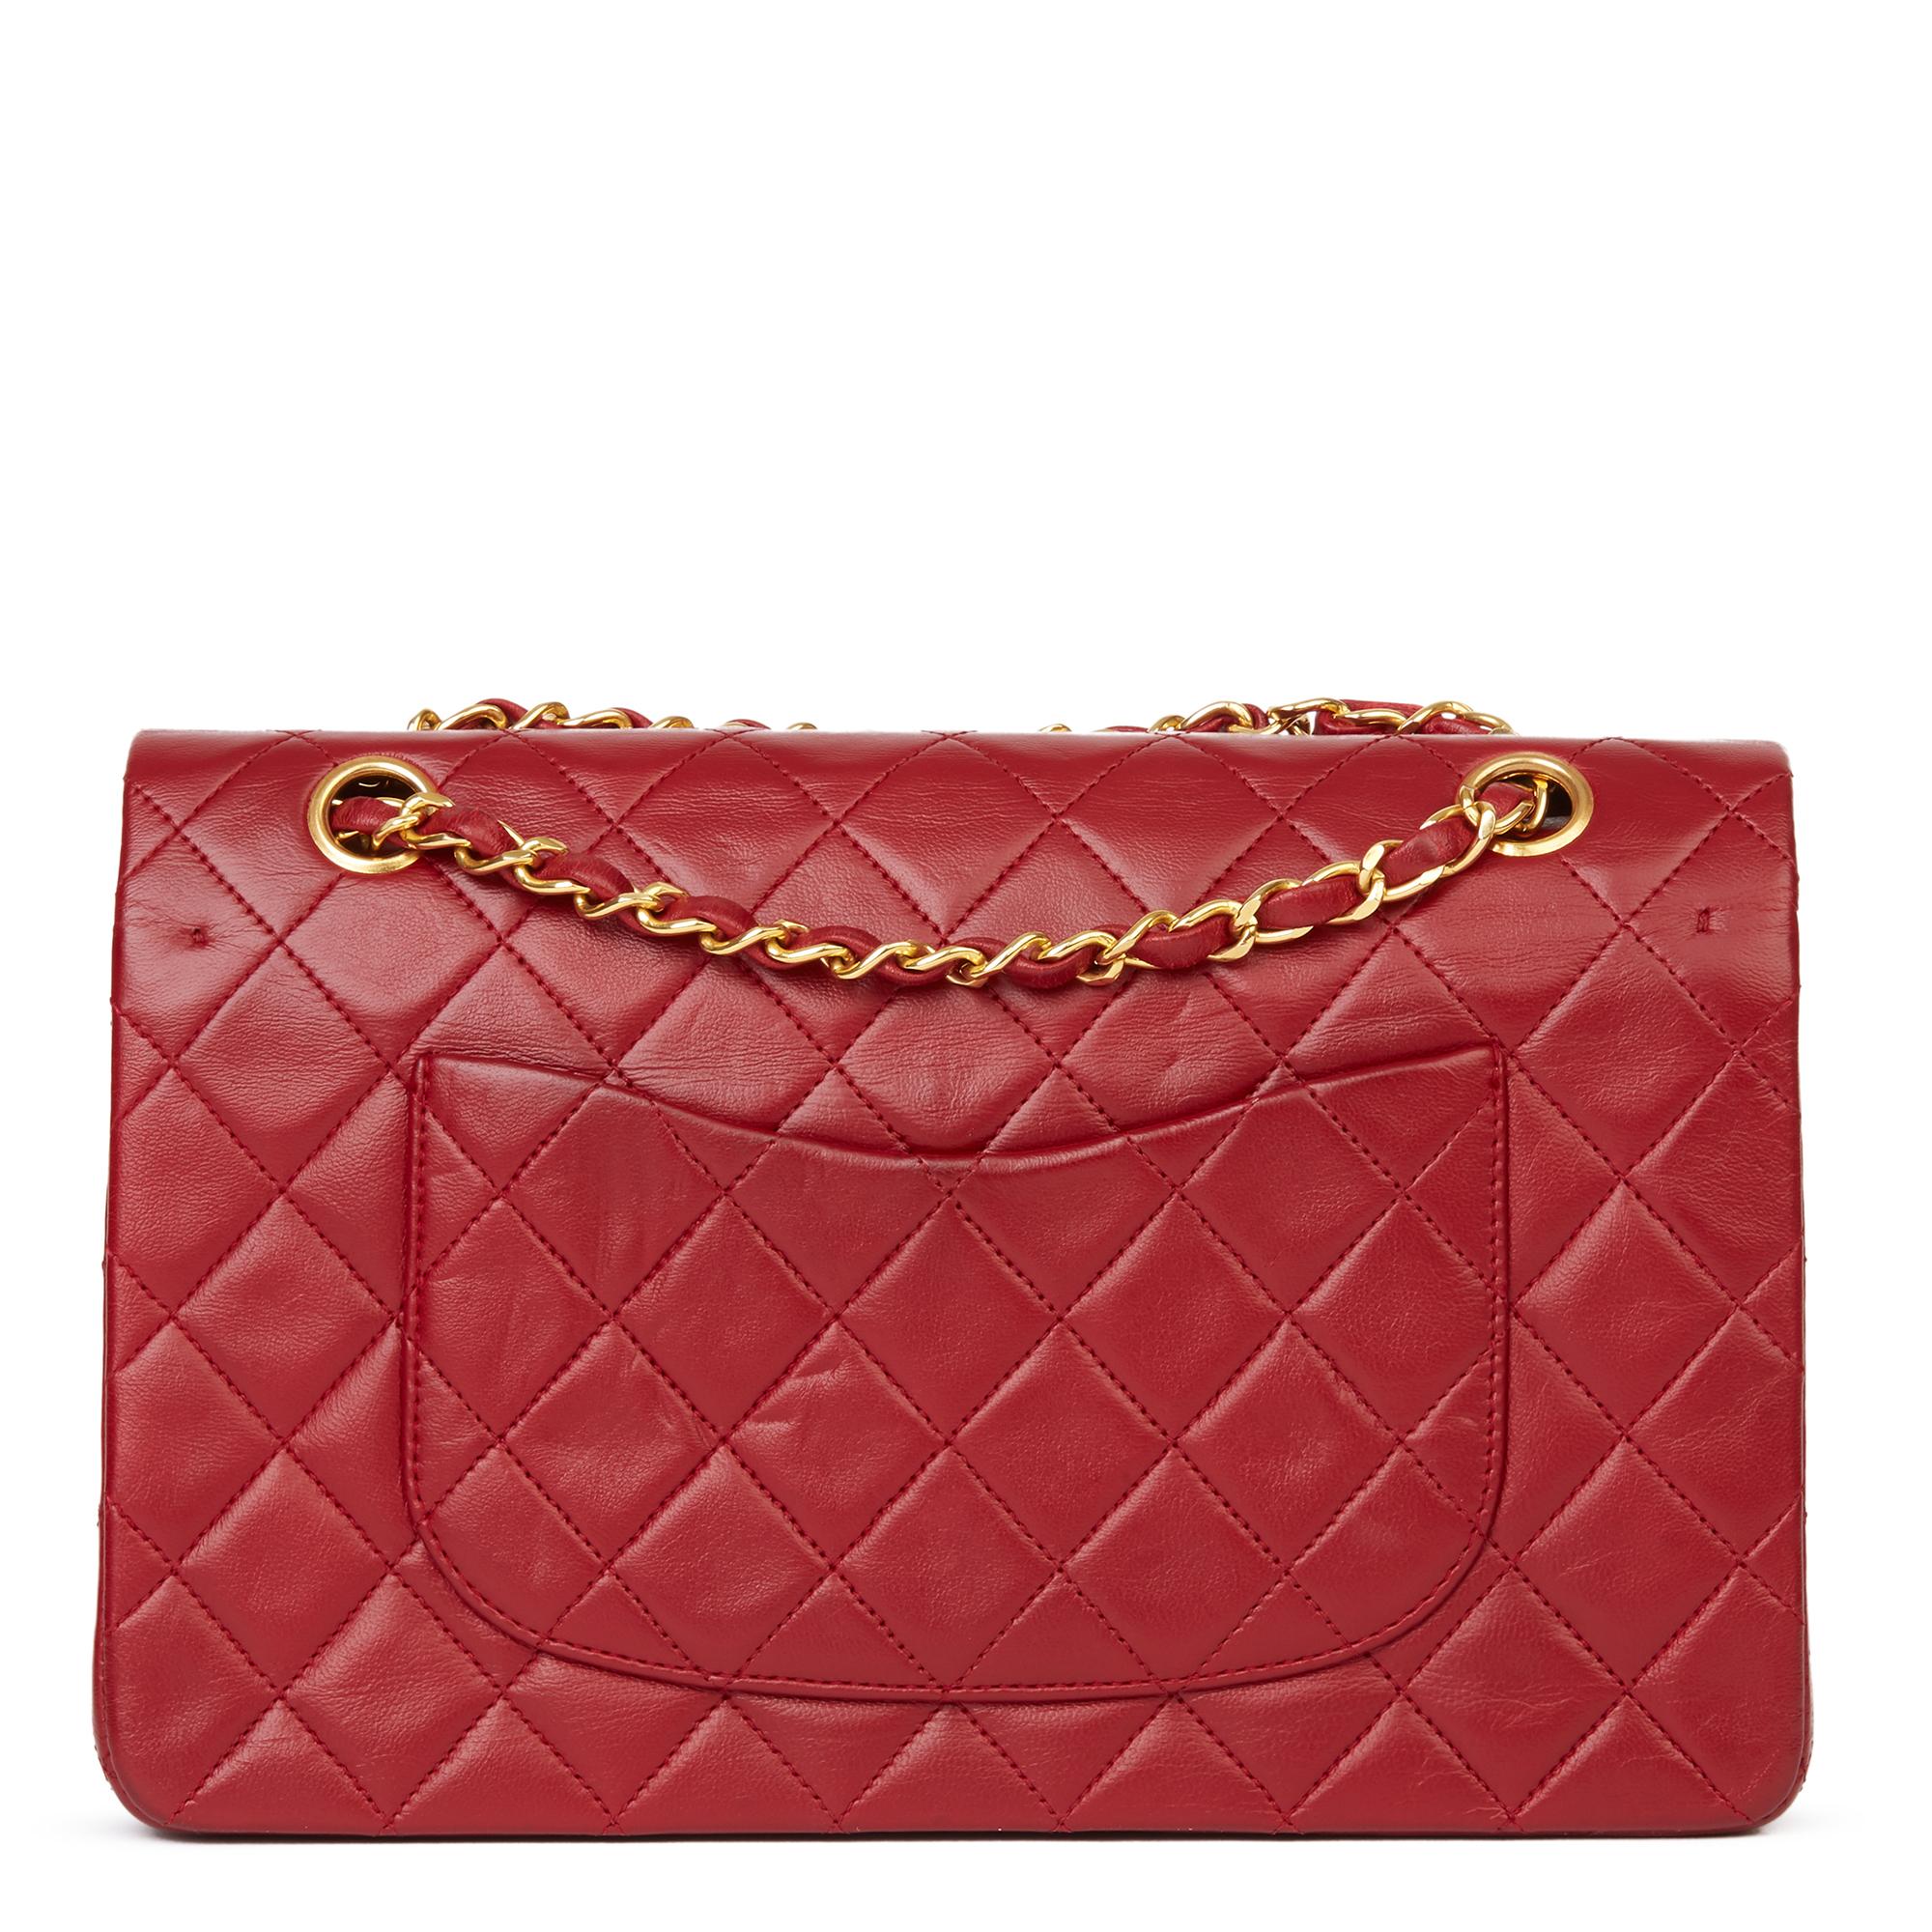 1991 Chanel Red Quilted Lambskin Vintage Medium Classic Double Flap Bag 1